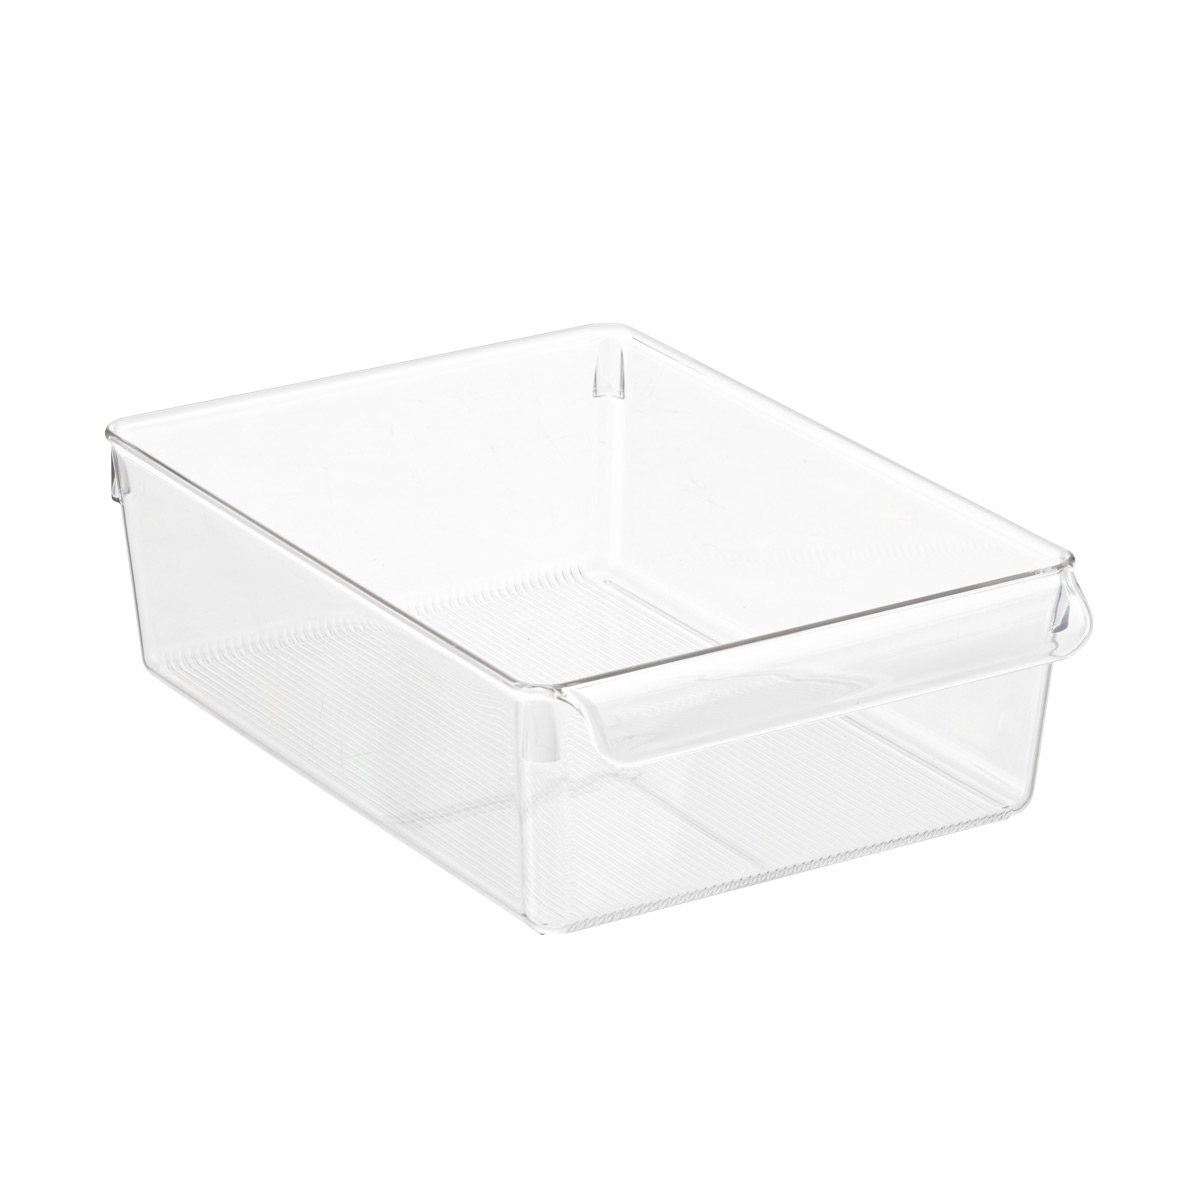 https://www.containerstore.com/catalogimages/314828/10051213-linus-wide-open-cabinet-org.jpg